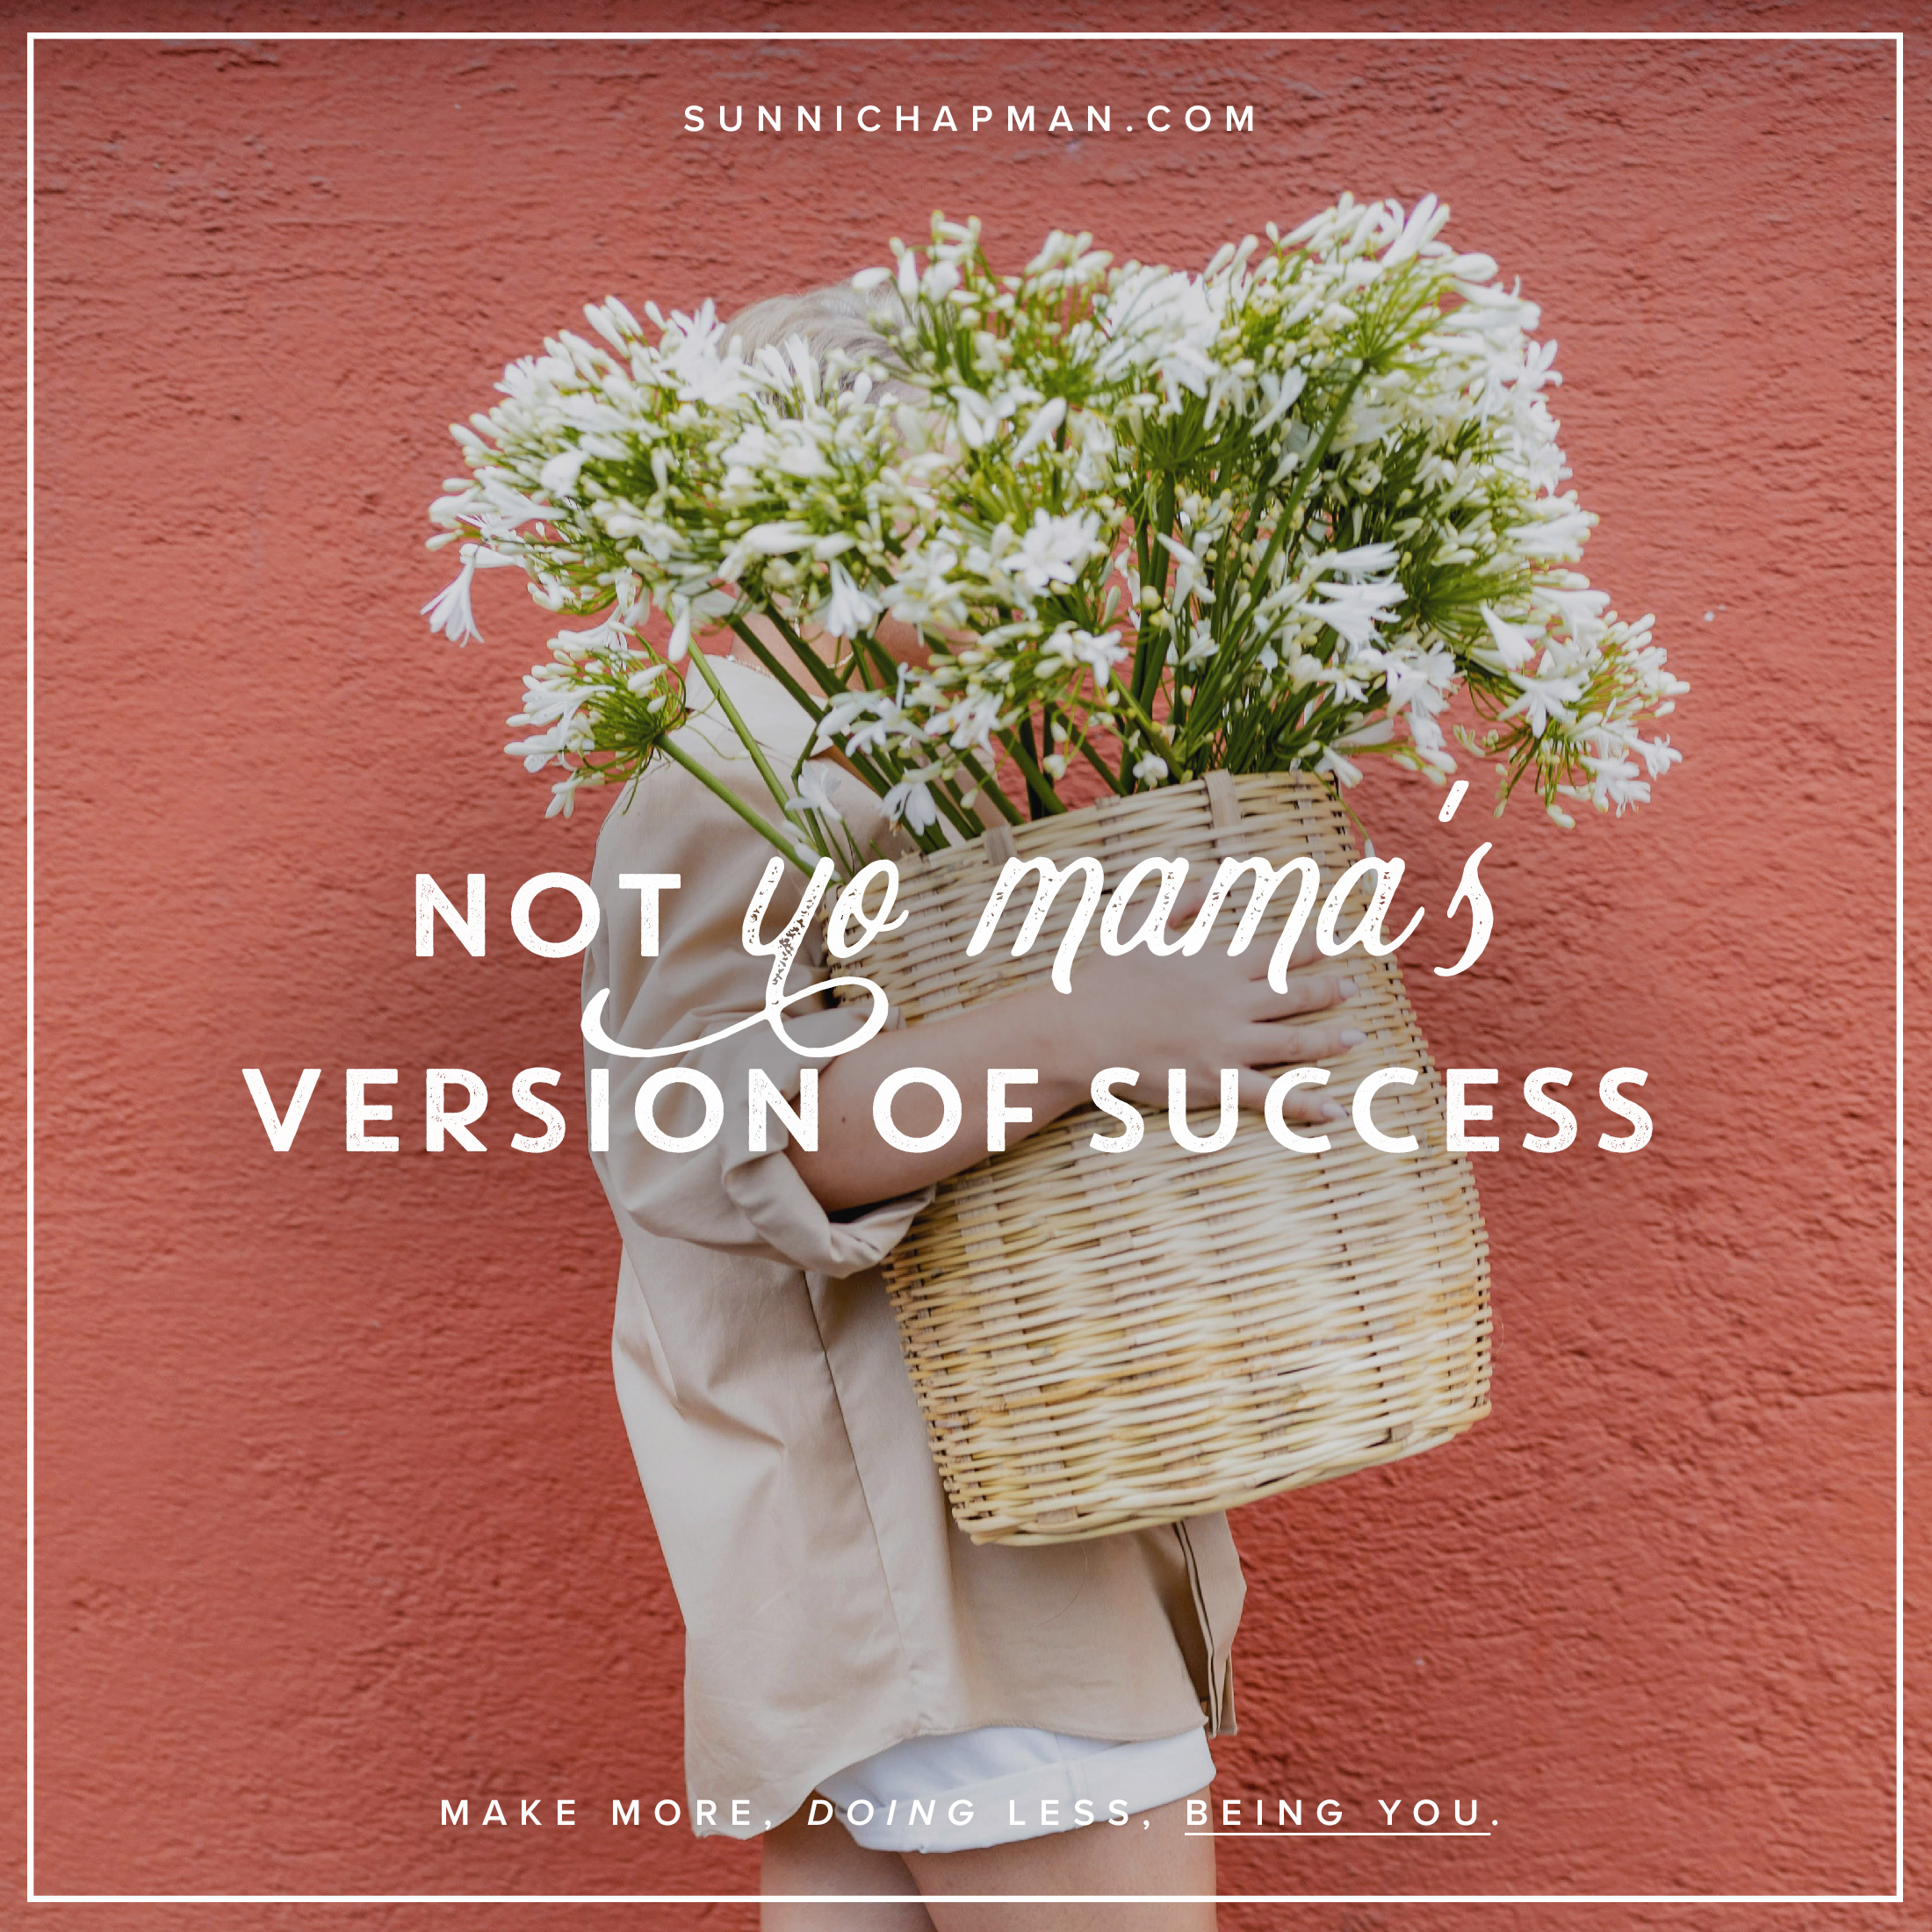 The image features a person holding a large basket filled with white flowers in front of them, covering most of their body. The background is a solid coral-colored wall. Overlaid text in a contrasting white font reads, "NOT YO MAMA'S VERSION OF SUCCESS." Beneath this main text, in a smaller font, it states, "MAKE MORE DOING LESS, BEING YOU," and in the top right corner is the URL "SUNNICHAPMAN.COM." The overall image appears to be a promotional or inspirational graphic.